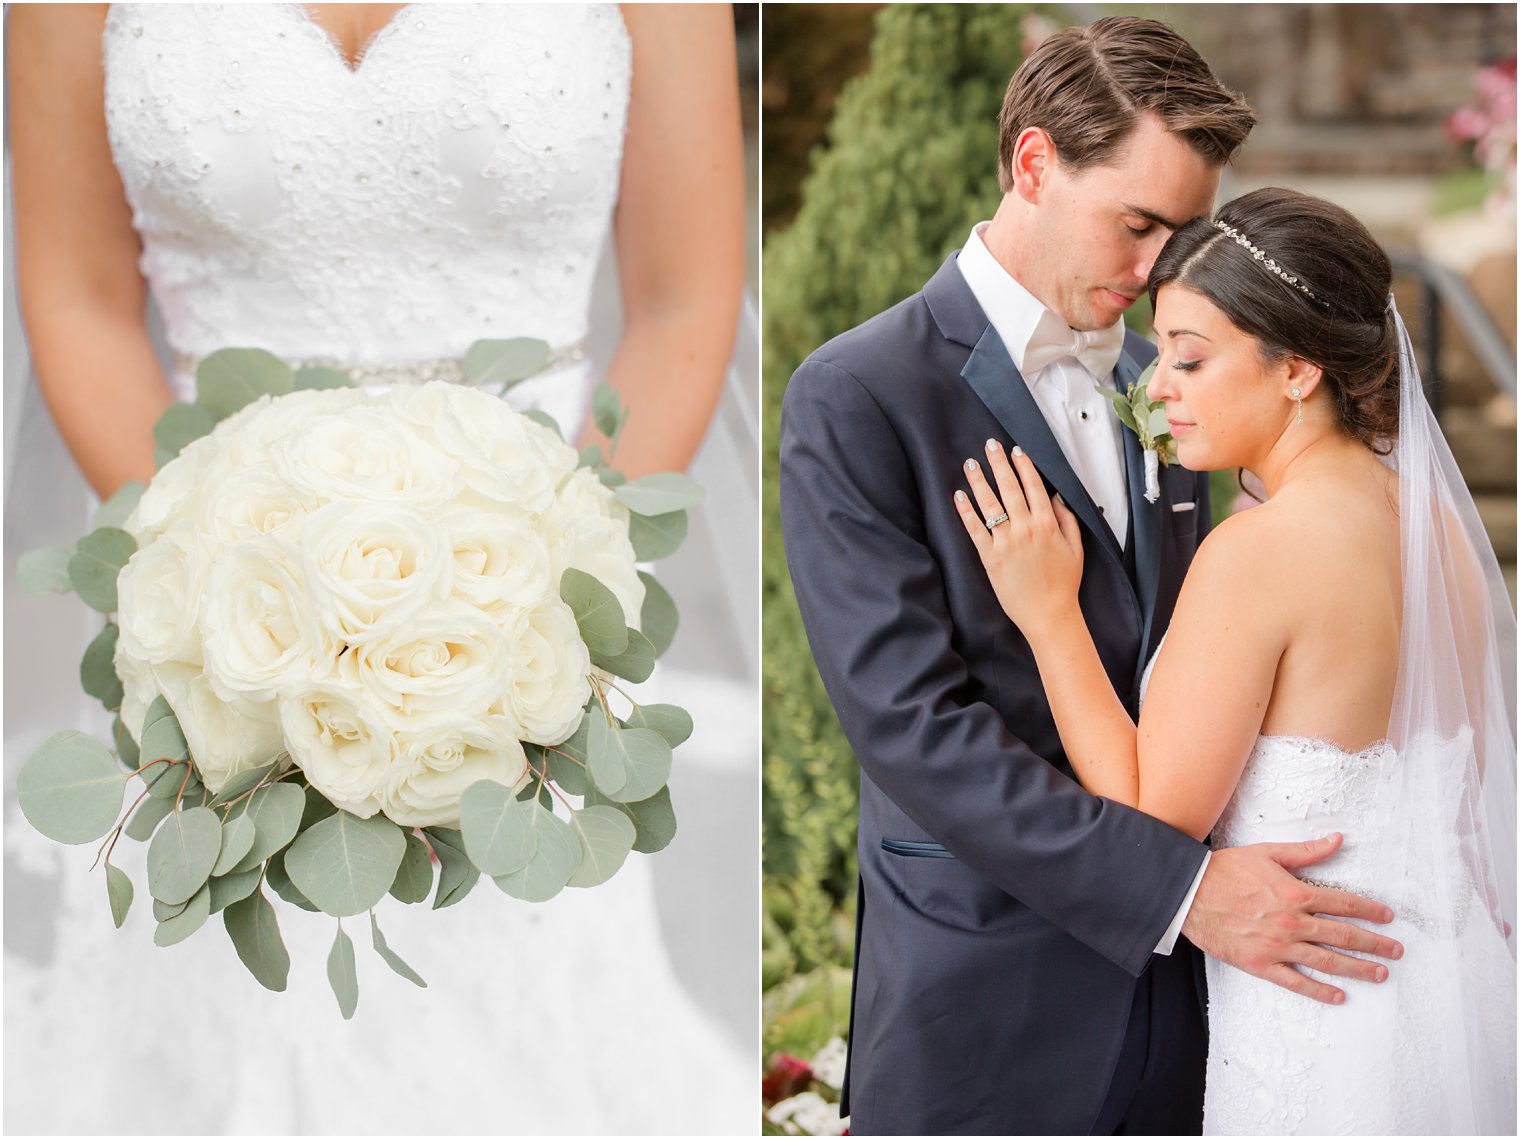 classic ivory rose bridal bouquet by Crest Florist and bride and groom pose at Park Savoy Estate 